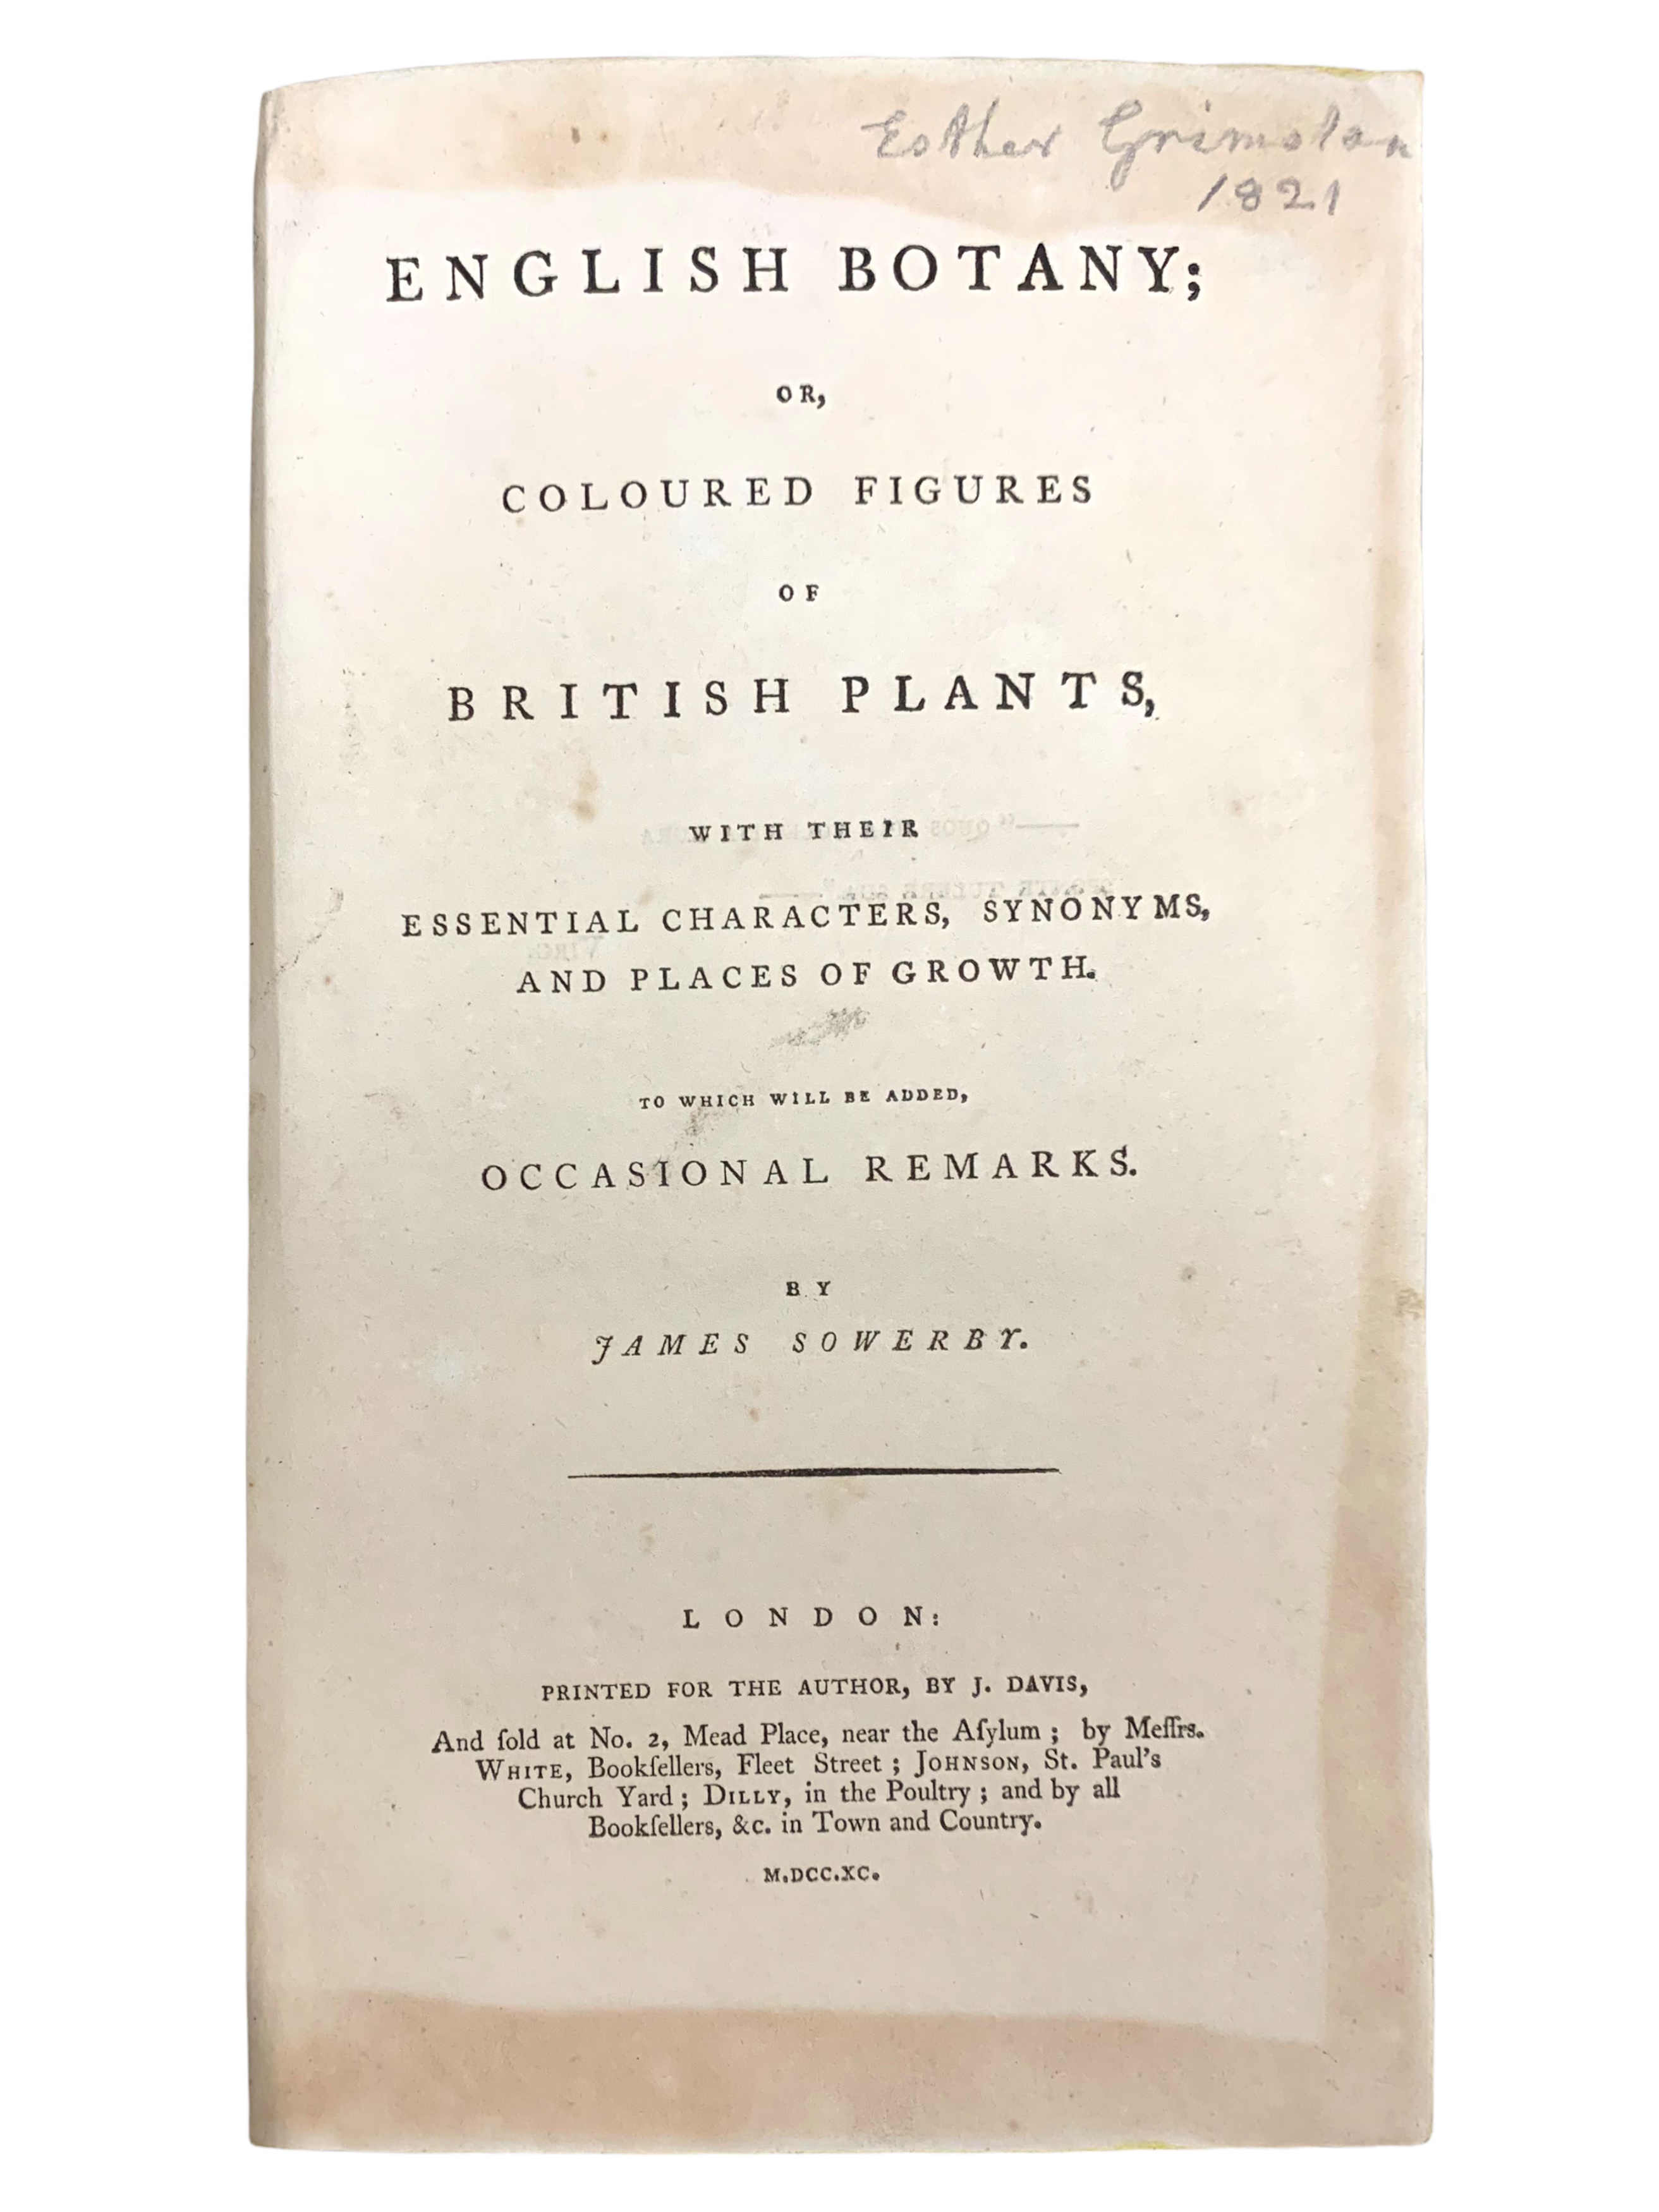 English Botany, or, Coloured Figures of British Plants, with their